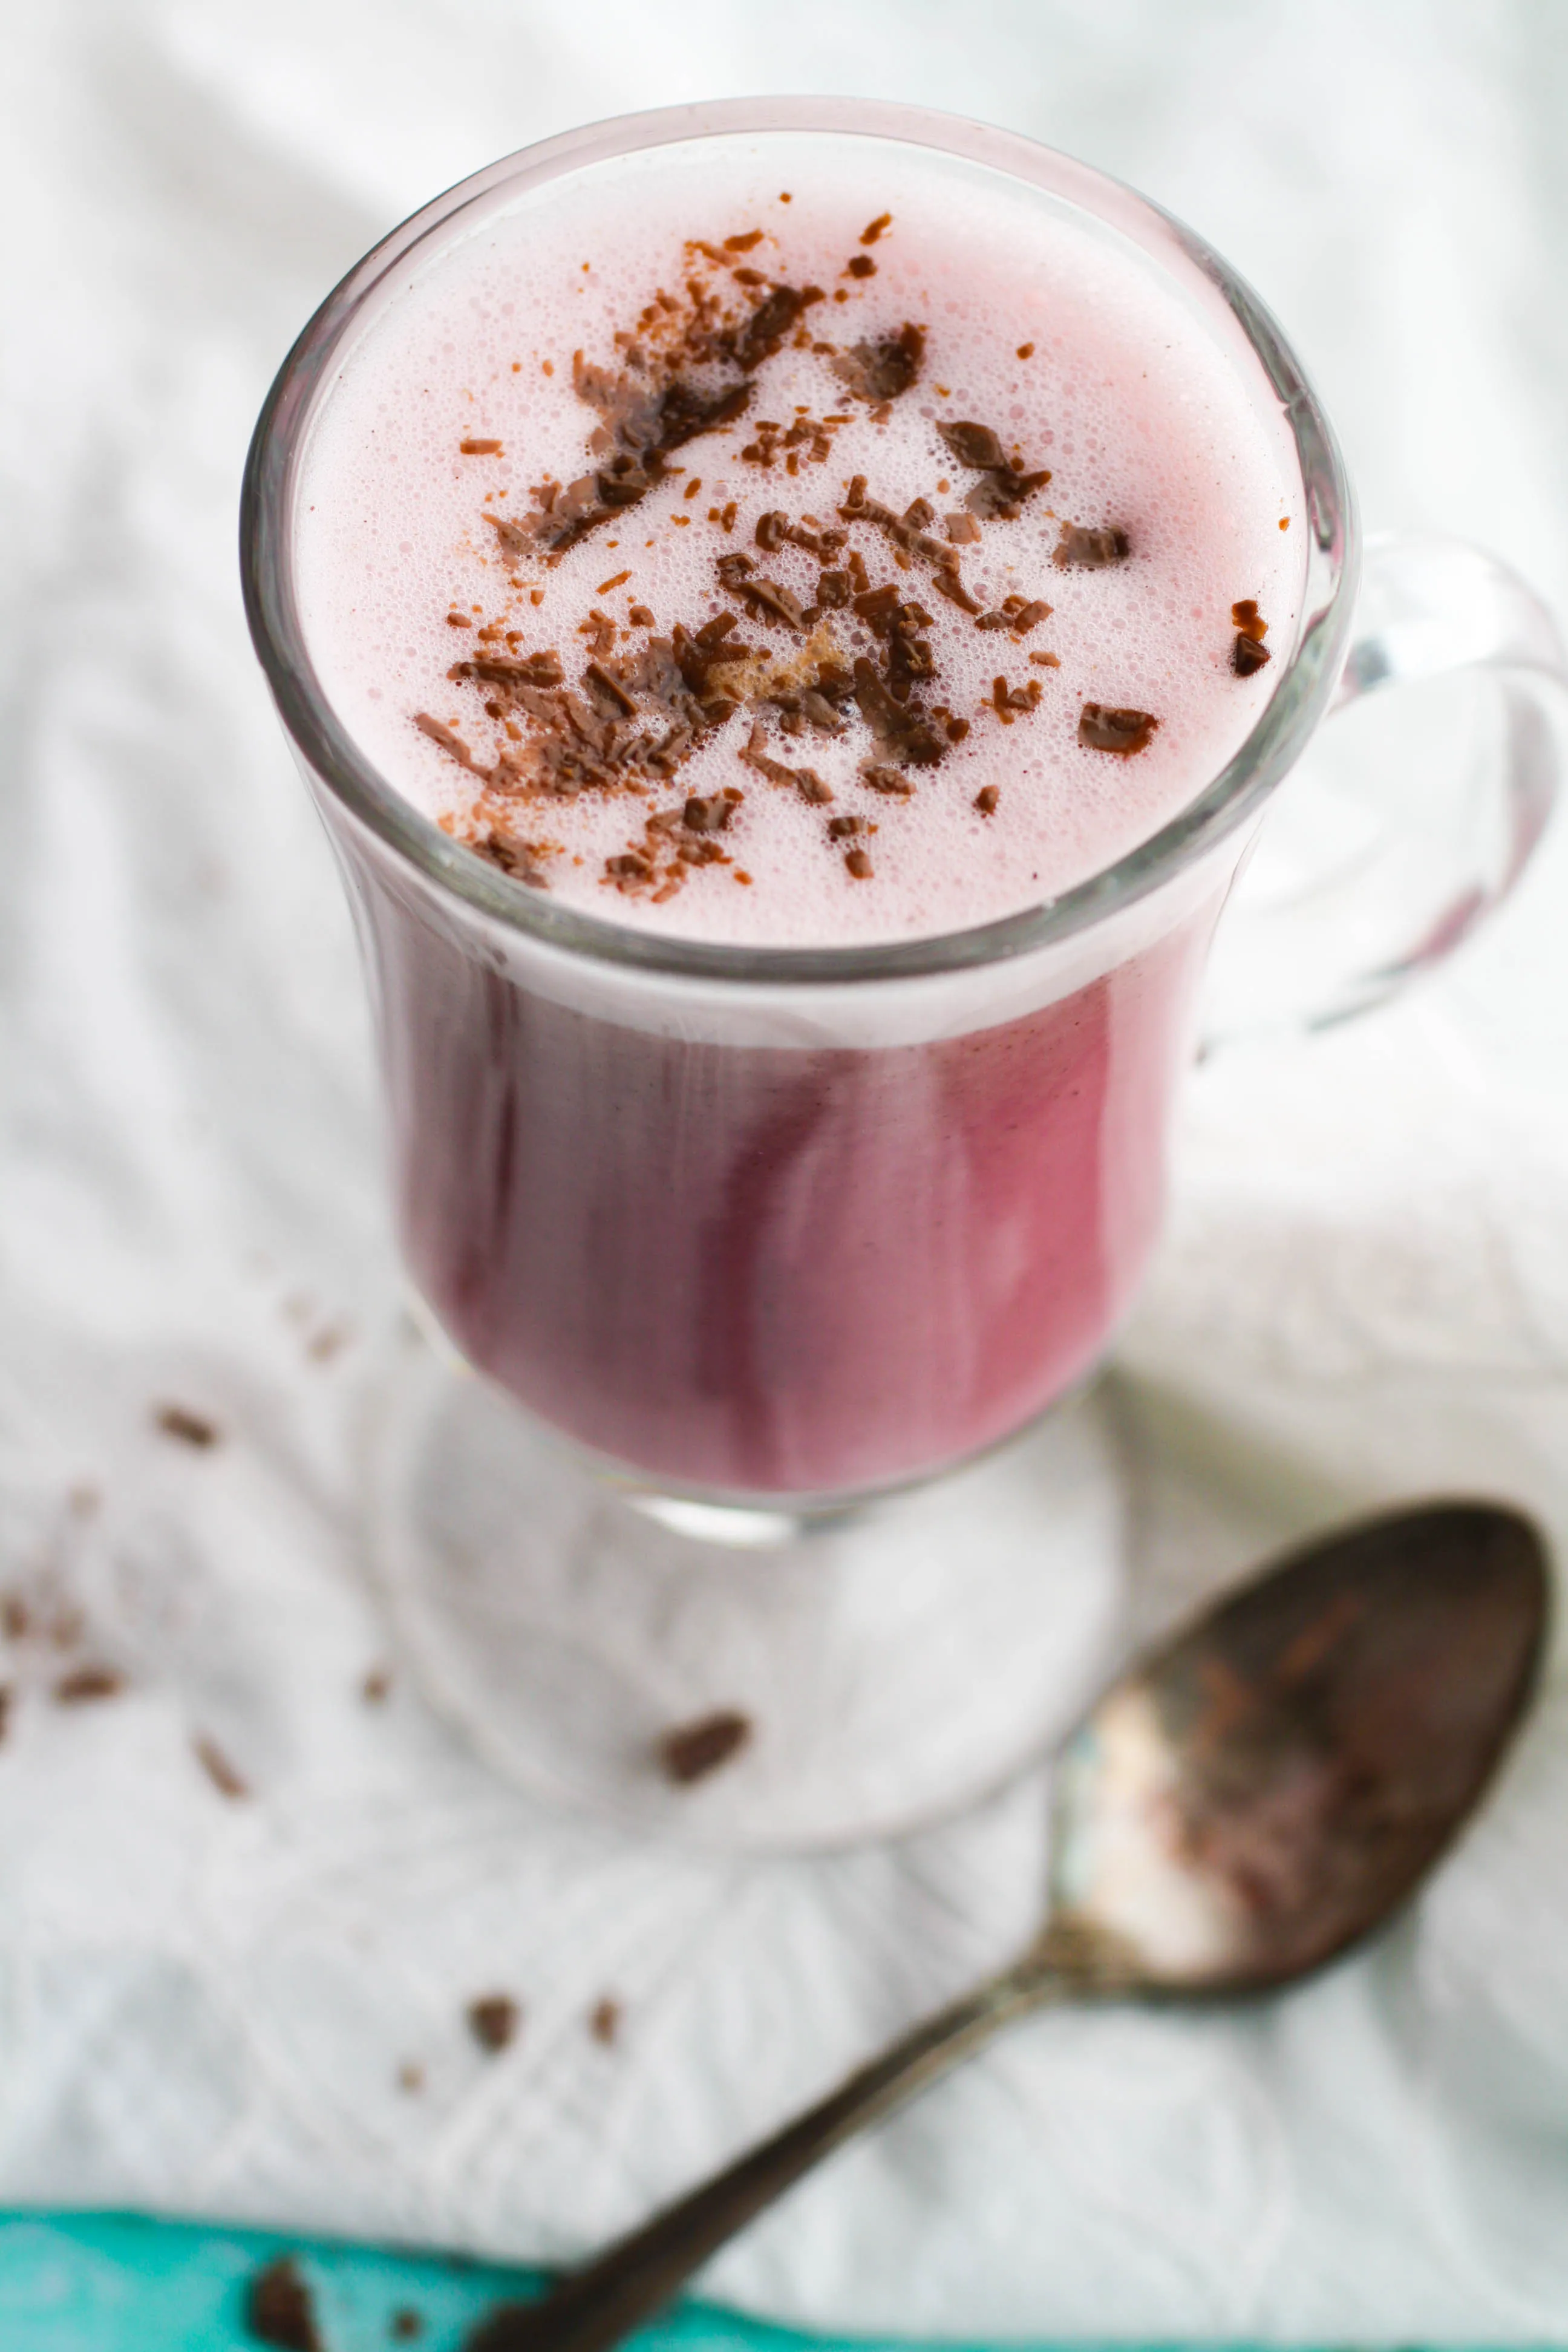 Spiced Beet and Oat Milk Latte is a little different for a warm, non-dairy drink, and it's wonderful!